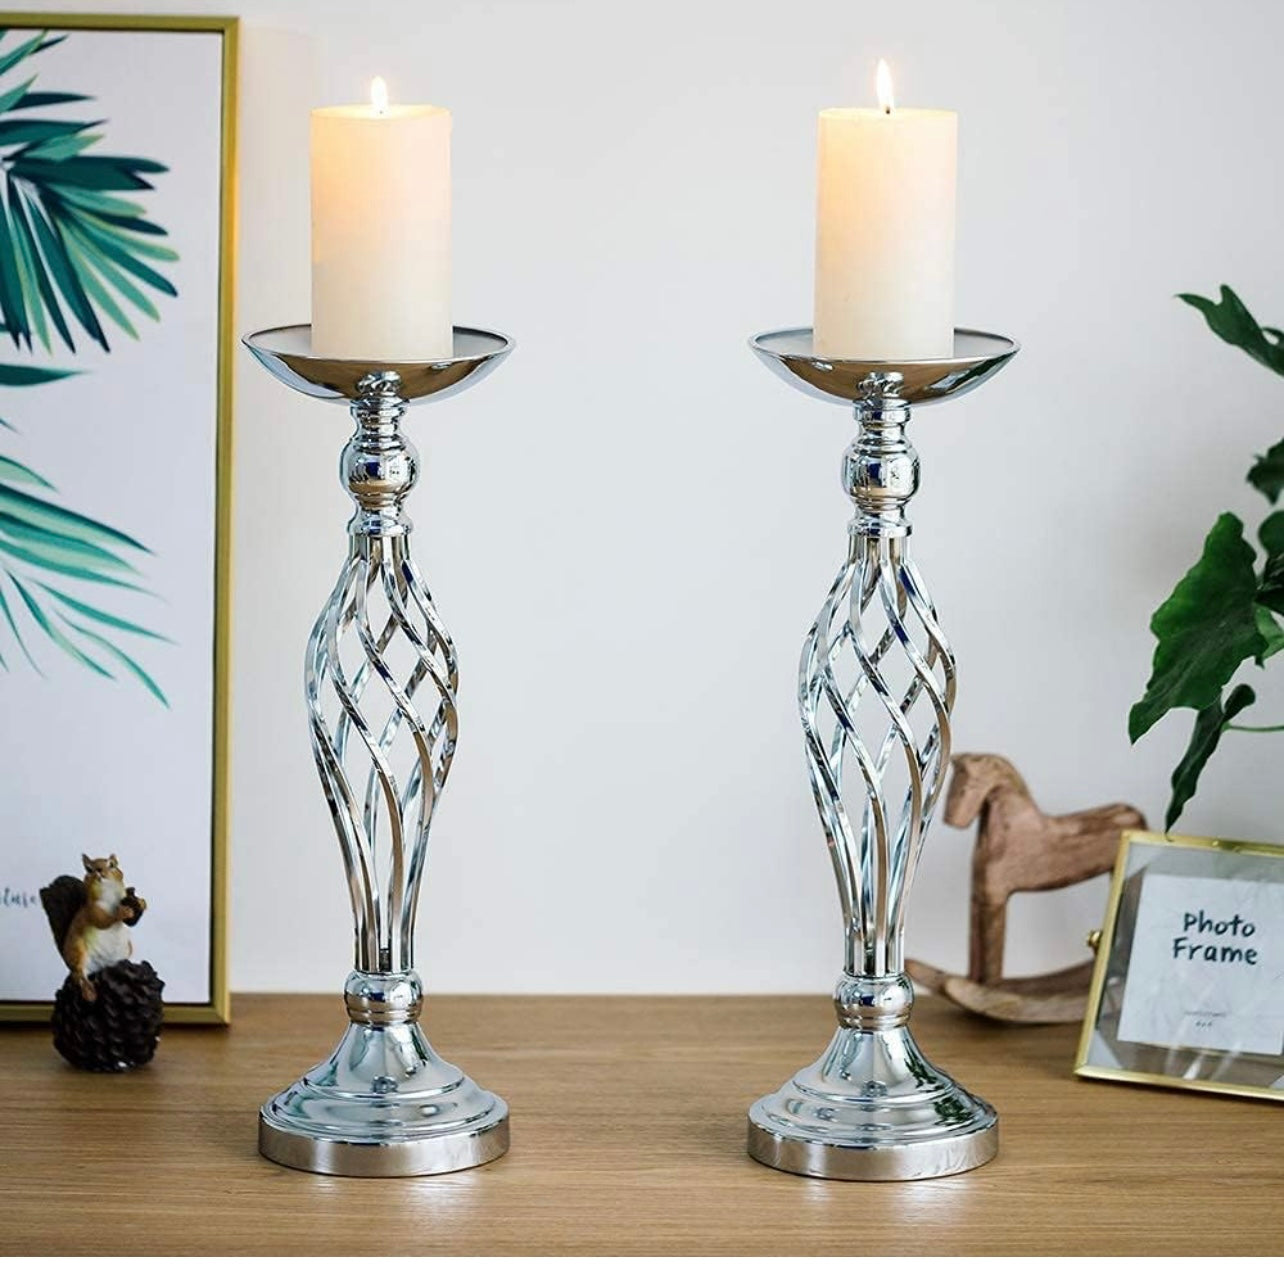 2 Pcs/Set Silver Metal Flower Vase, Wedding/ Party Flowers Centerpieces for Table, Tall Candle Holder for Pillar Candle (17.7inch-45CM)